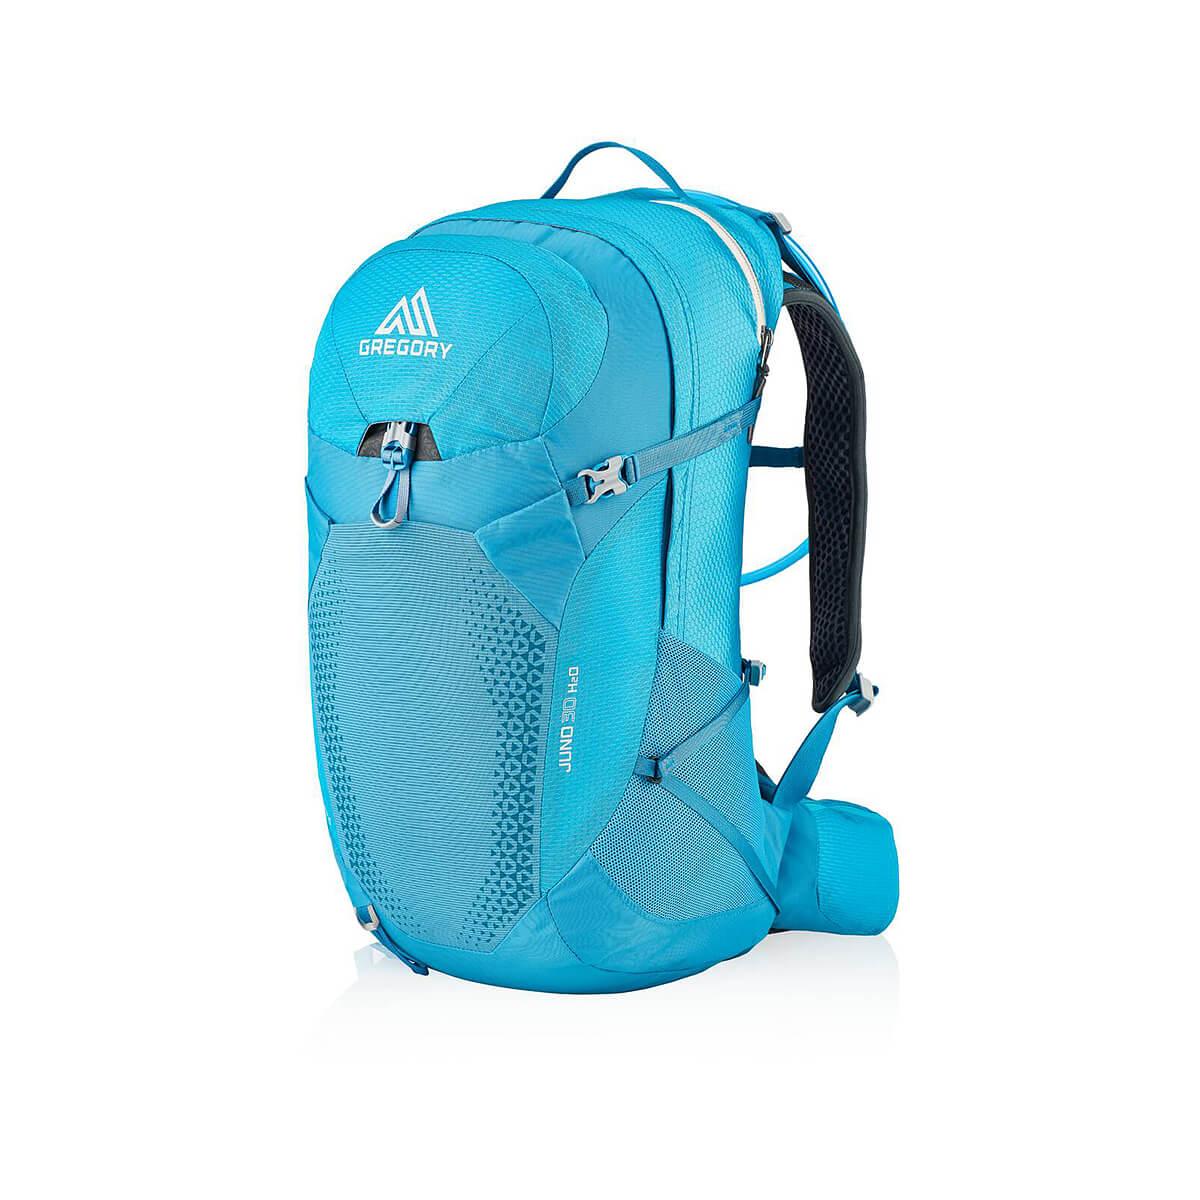  Juno 30 H2o Backpack - Plus Size